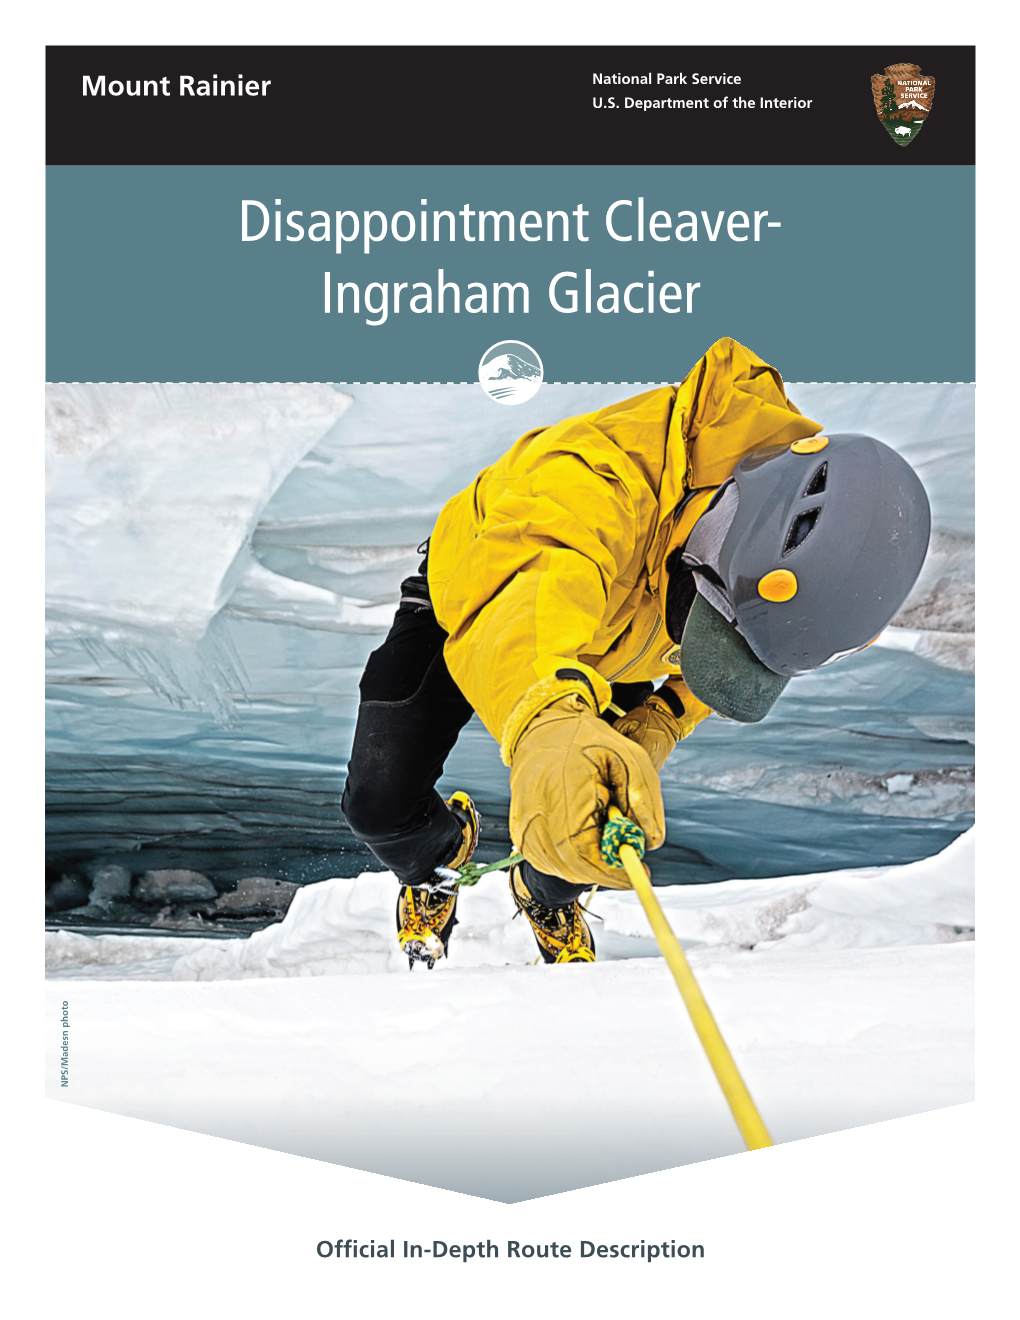 Disappointment Cleaver- Ingraham Glacier NPS/Madesn Photo